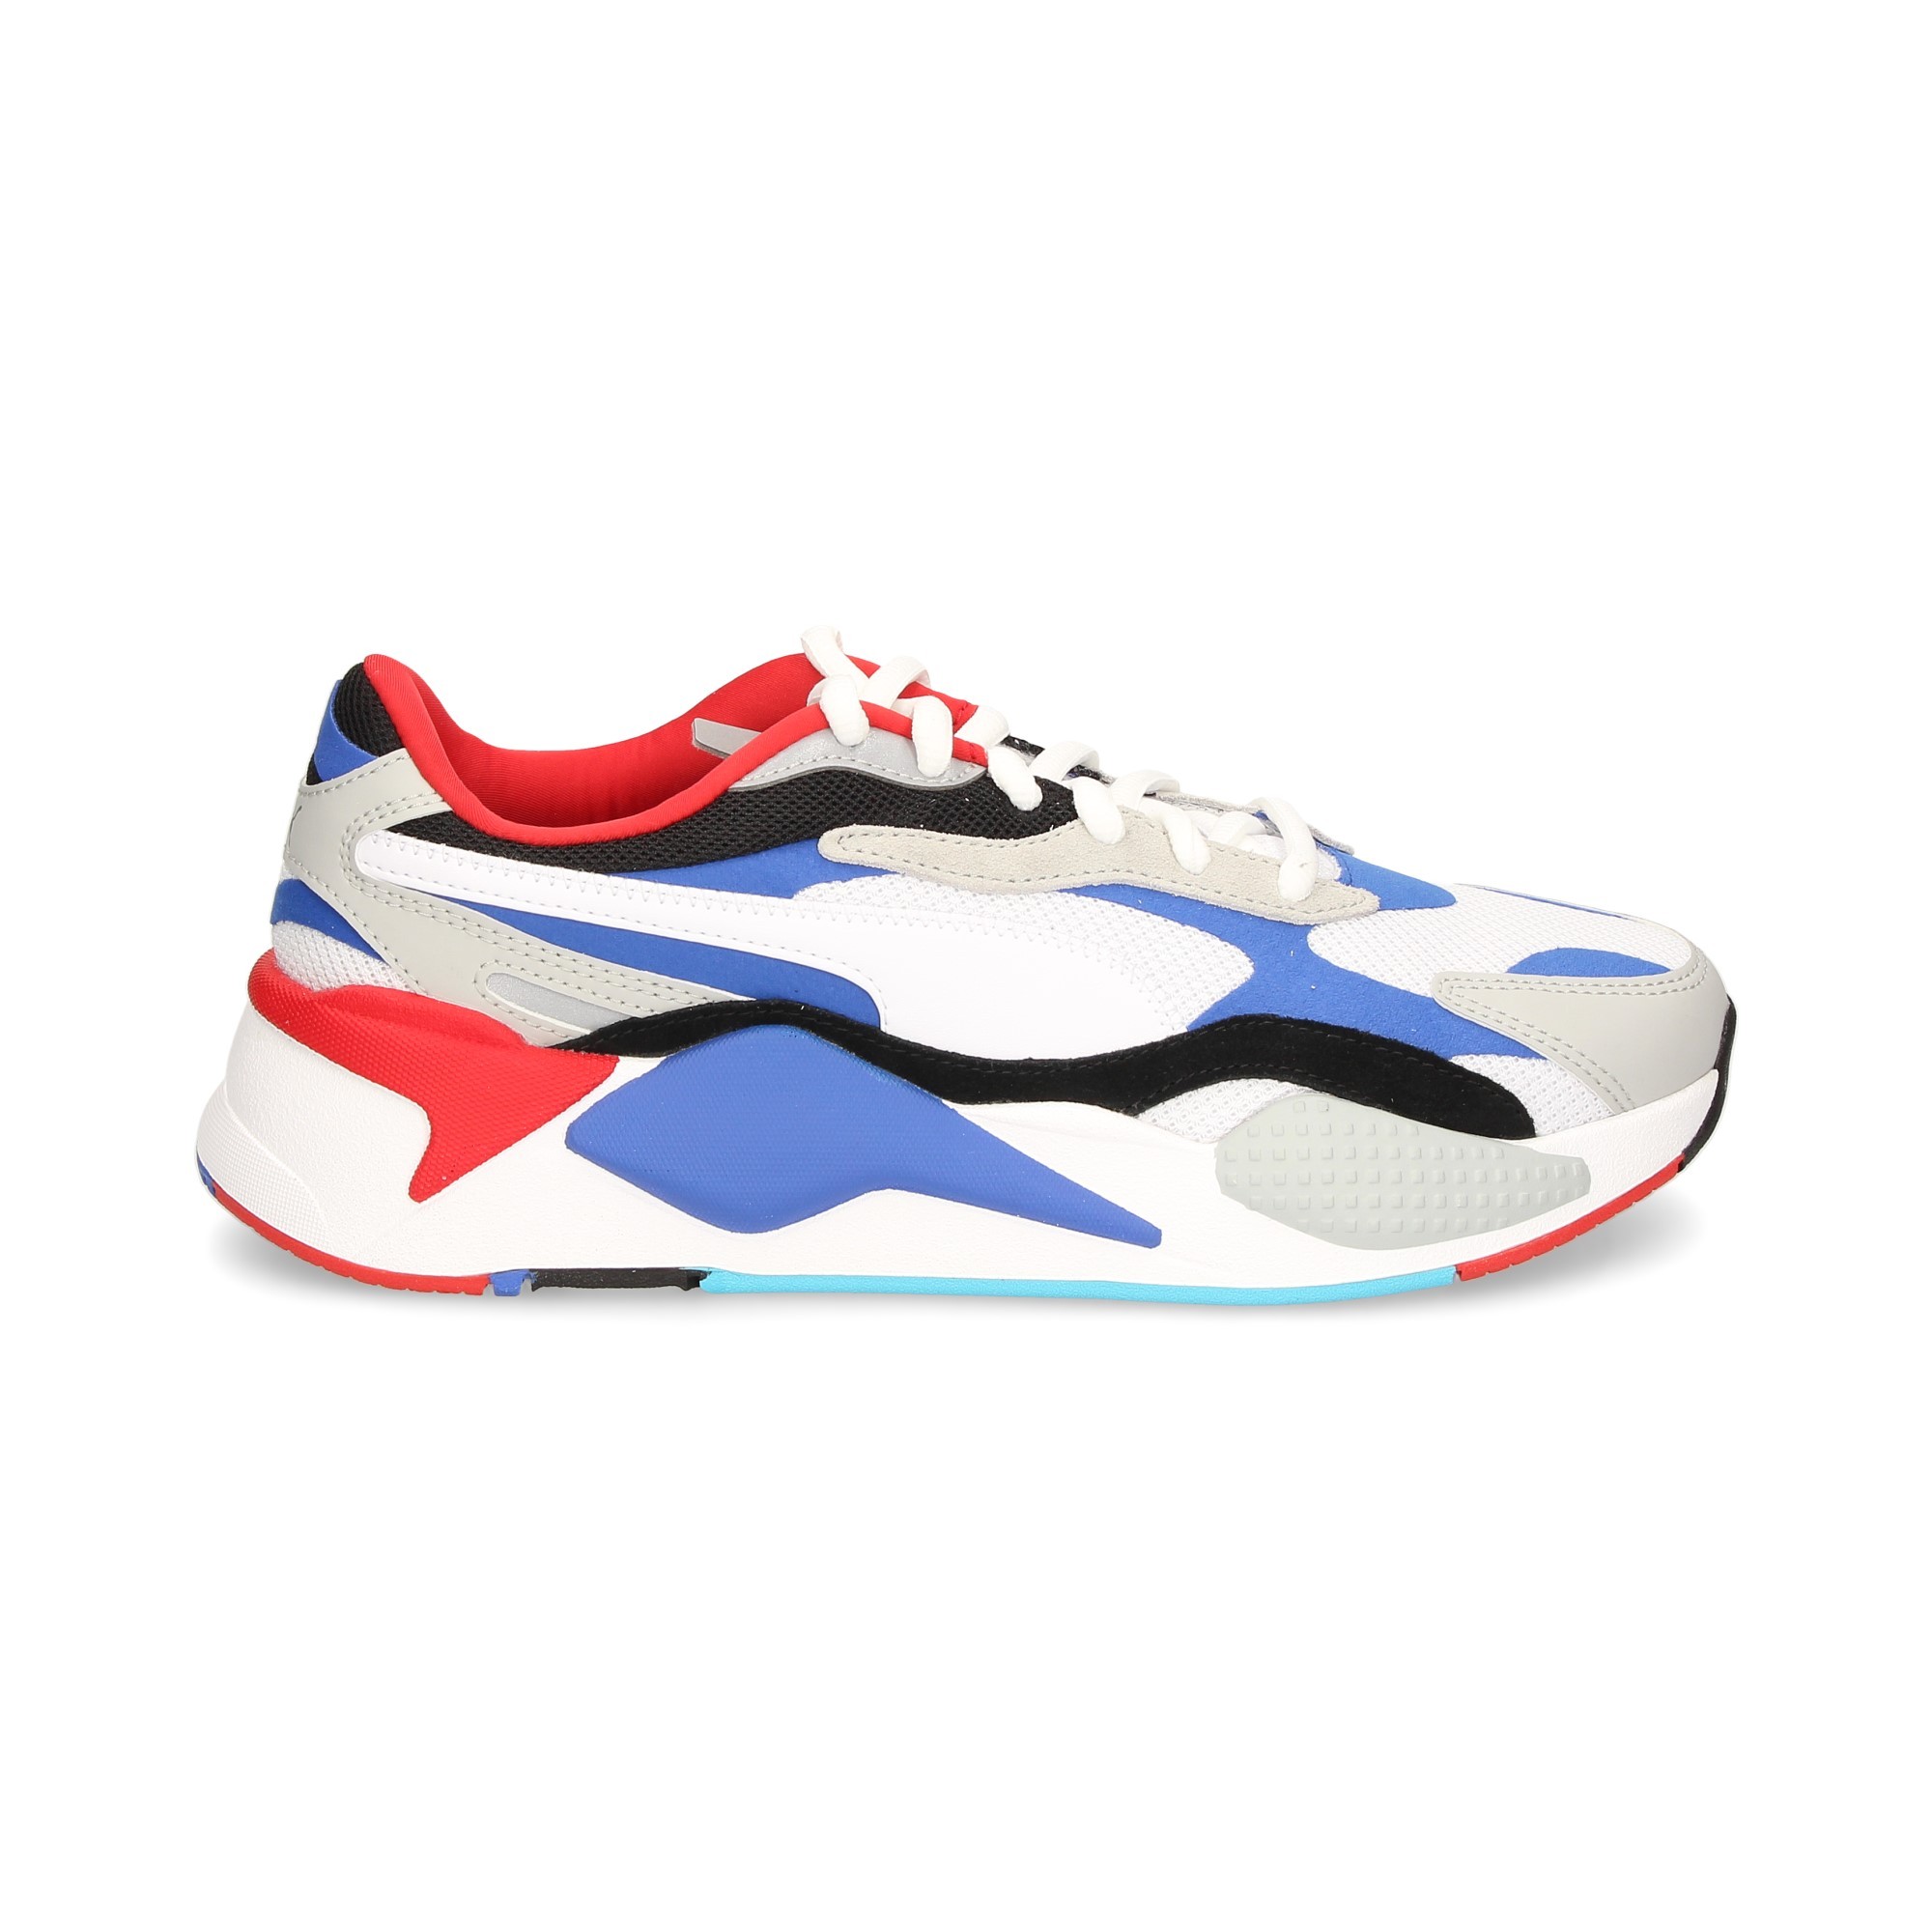 sporty-mesh-puzzle-weiss-blau-rot